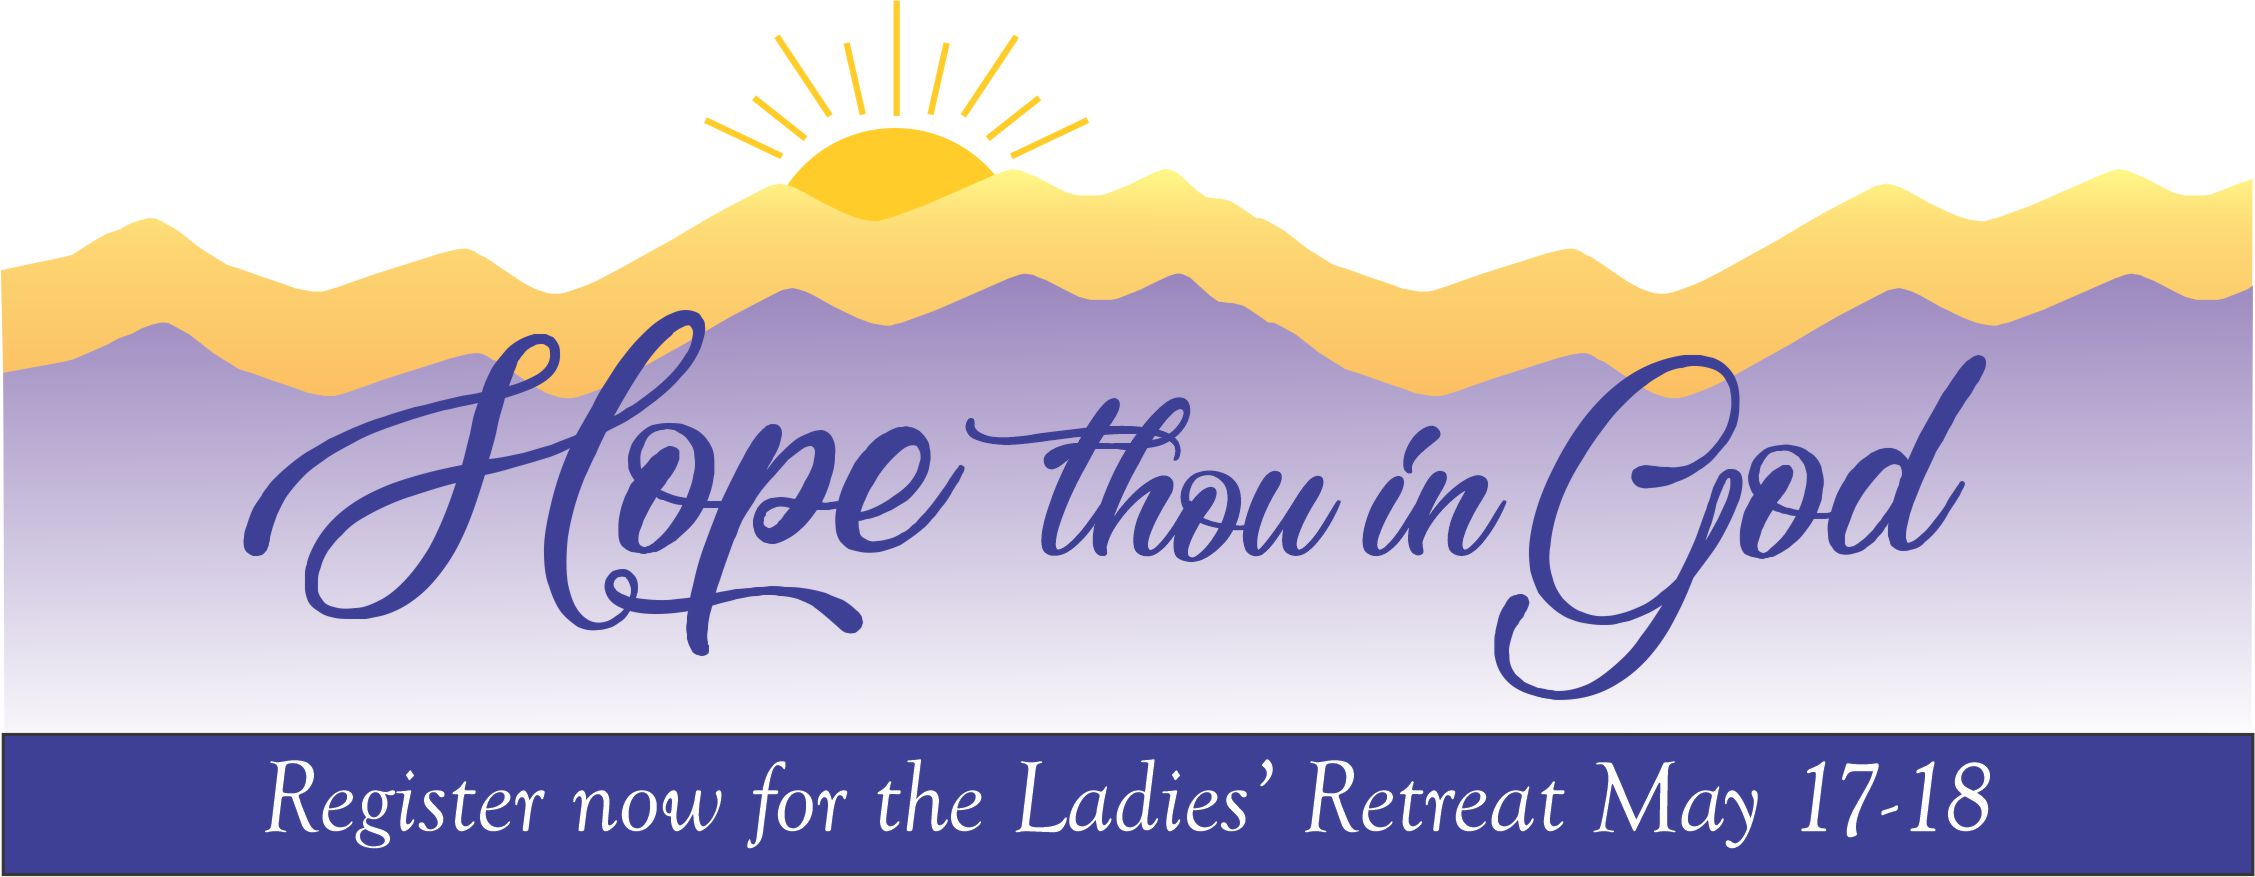 ladies retreat header for page